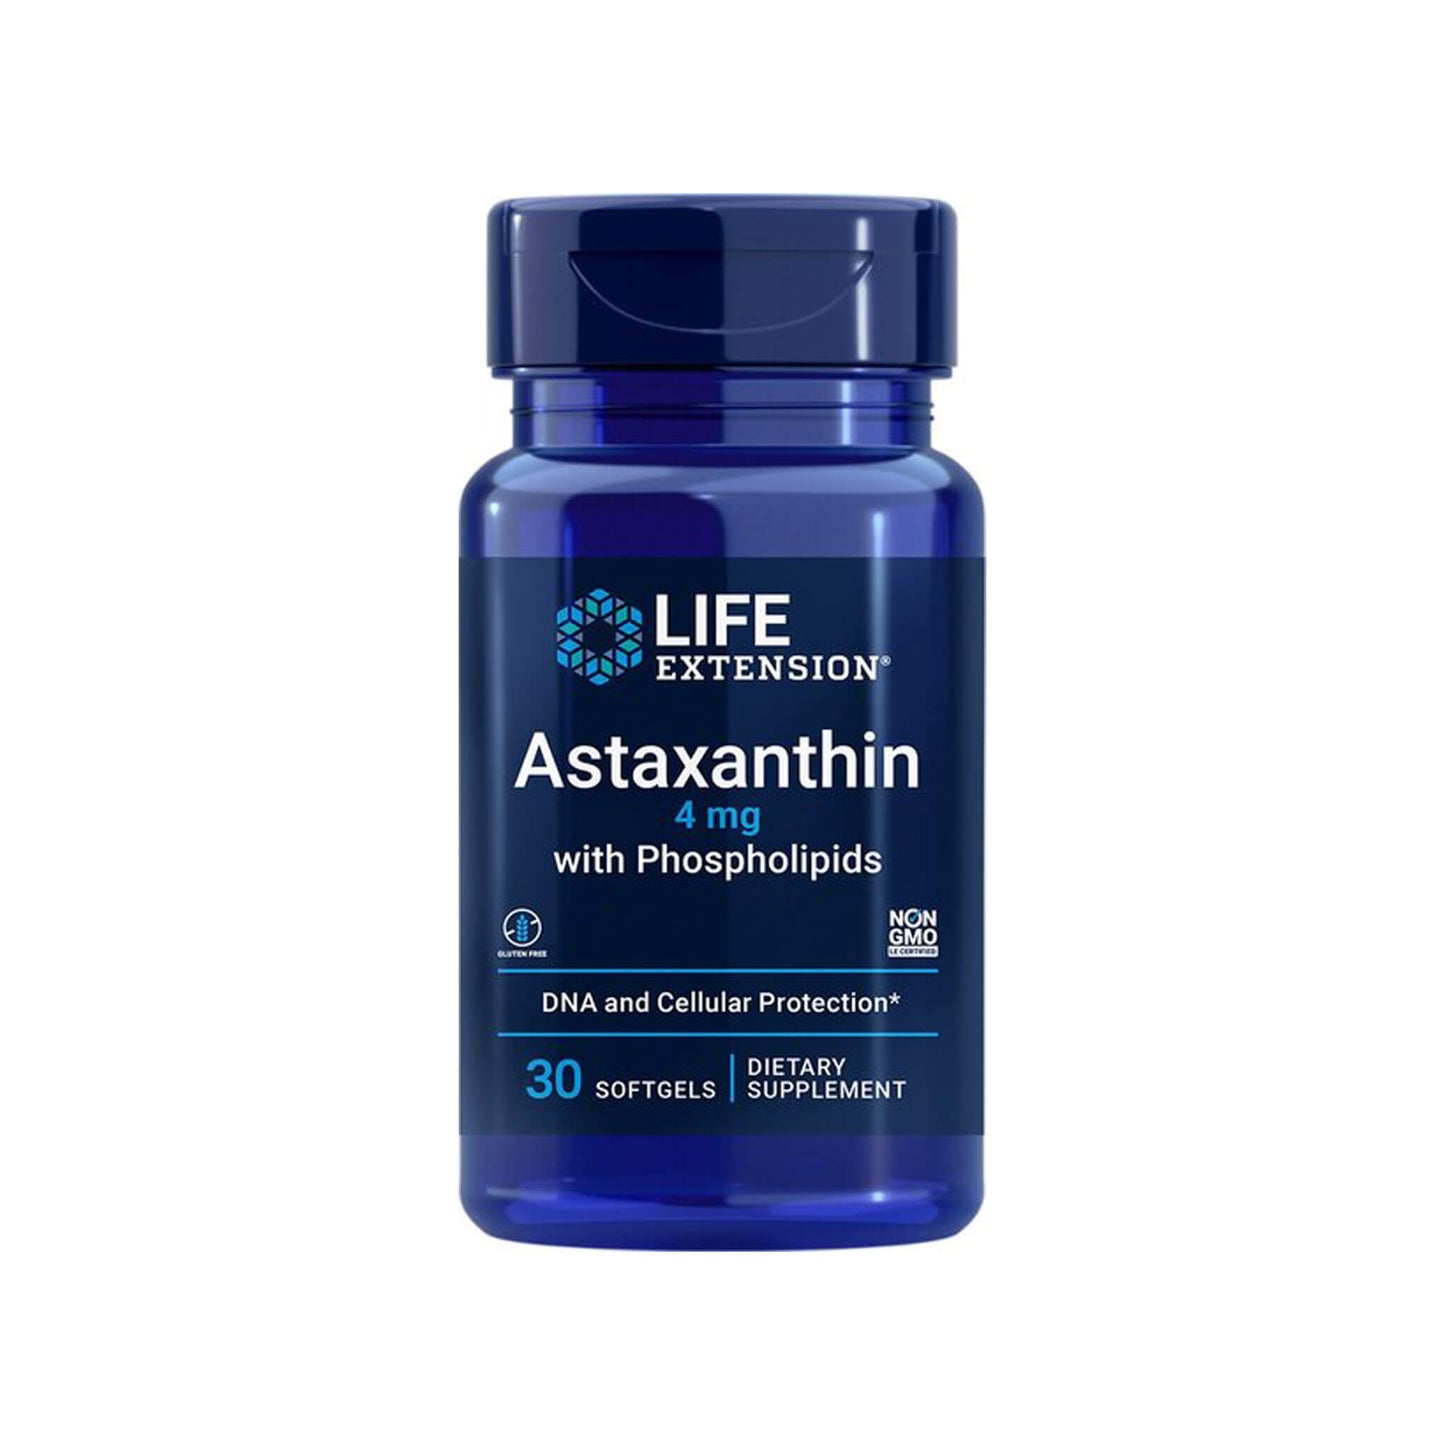 Life Extension Astaxanthin with Phospholipids, 4mg - 30 Soft Gels